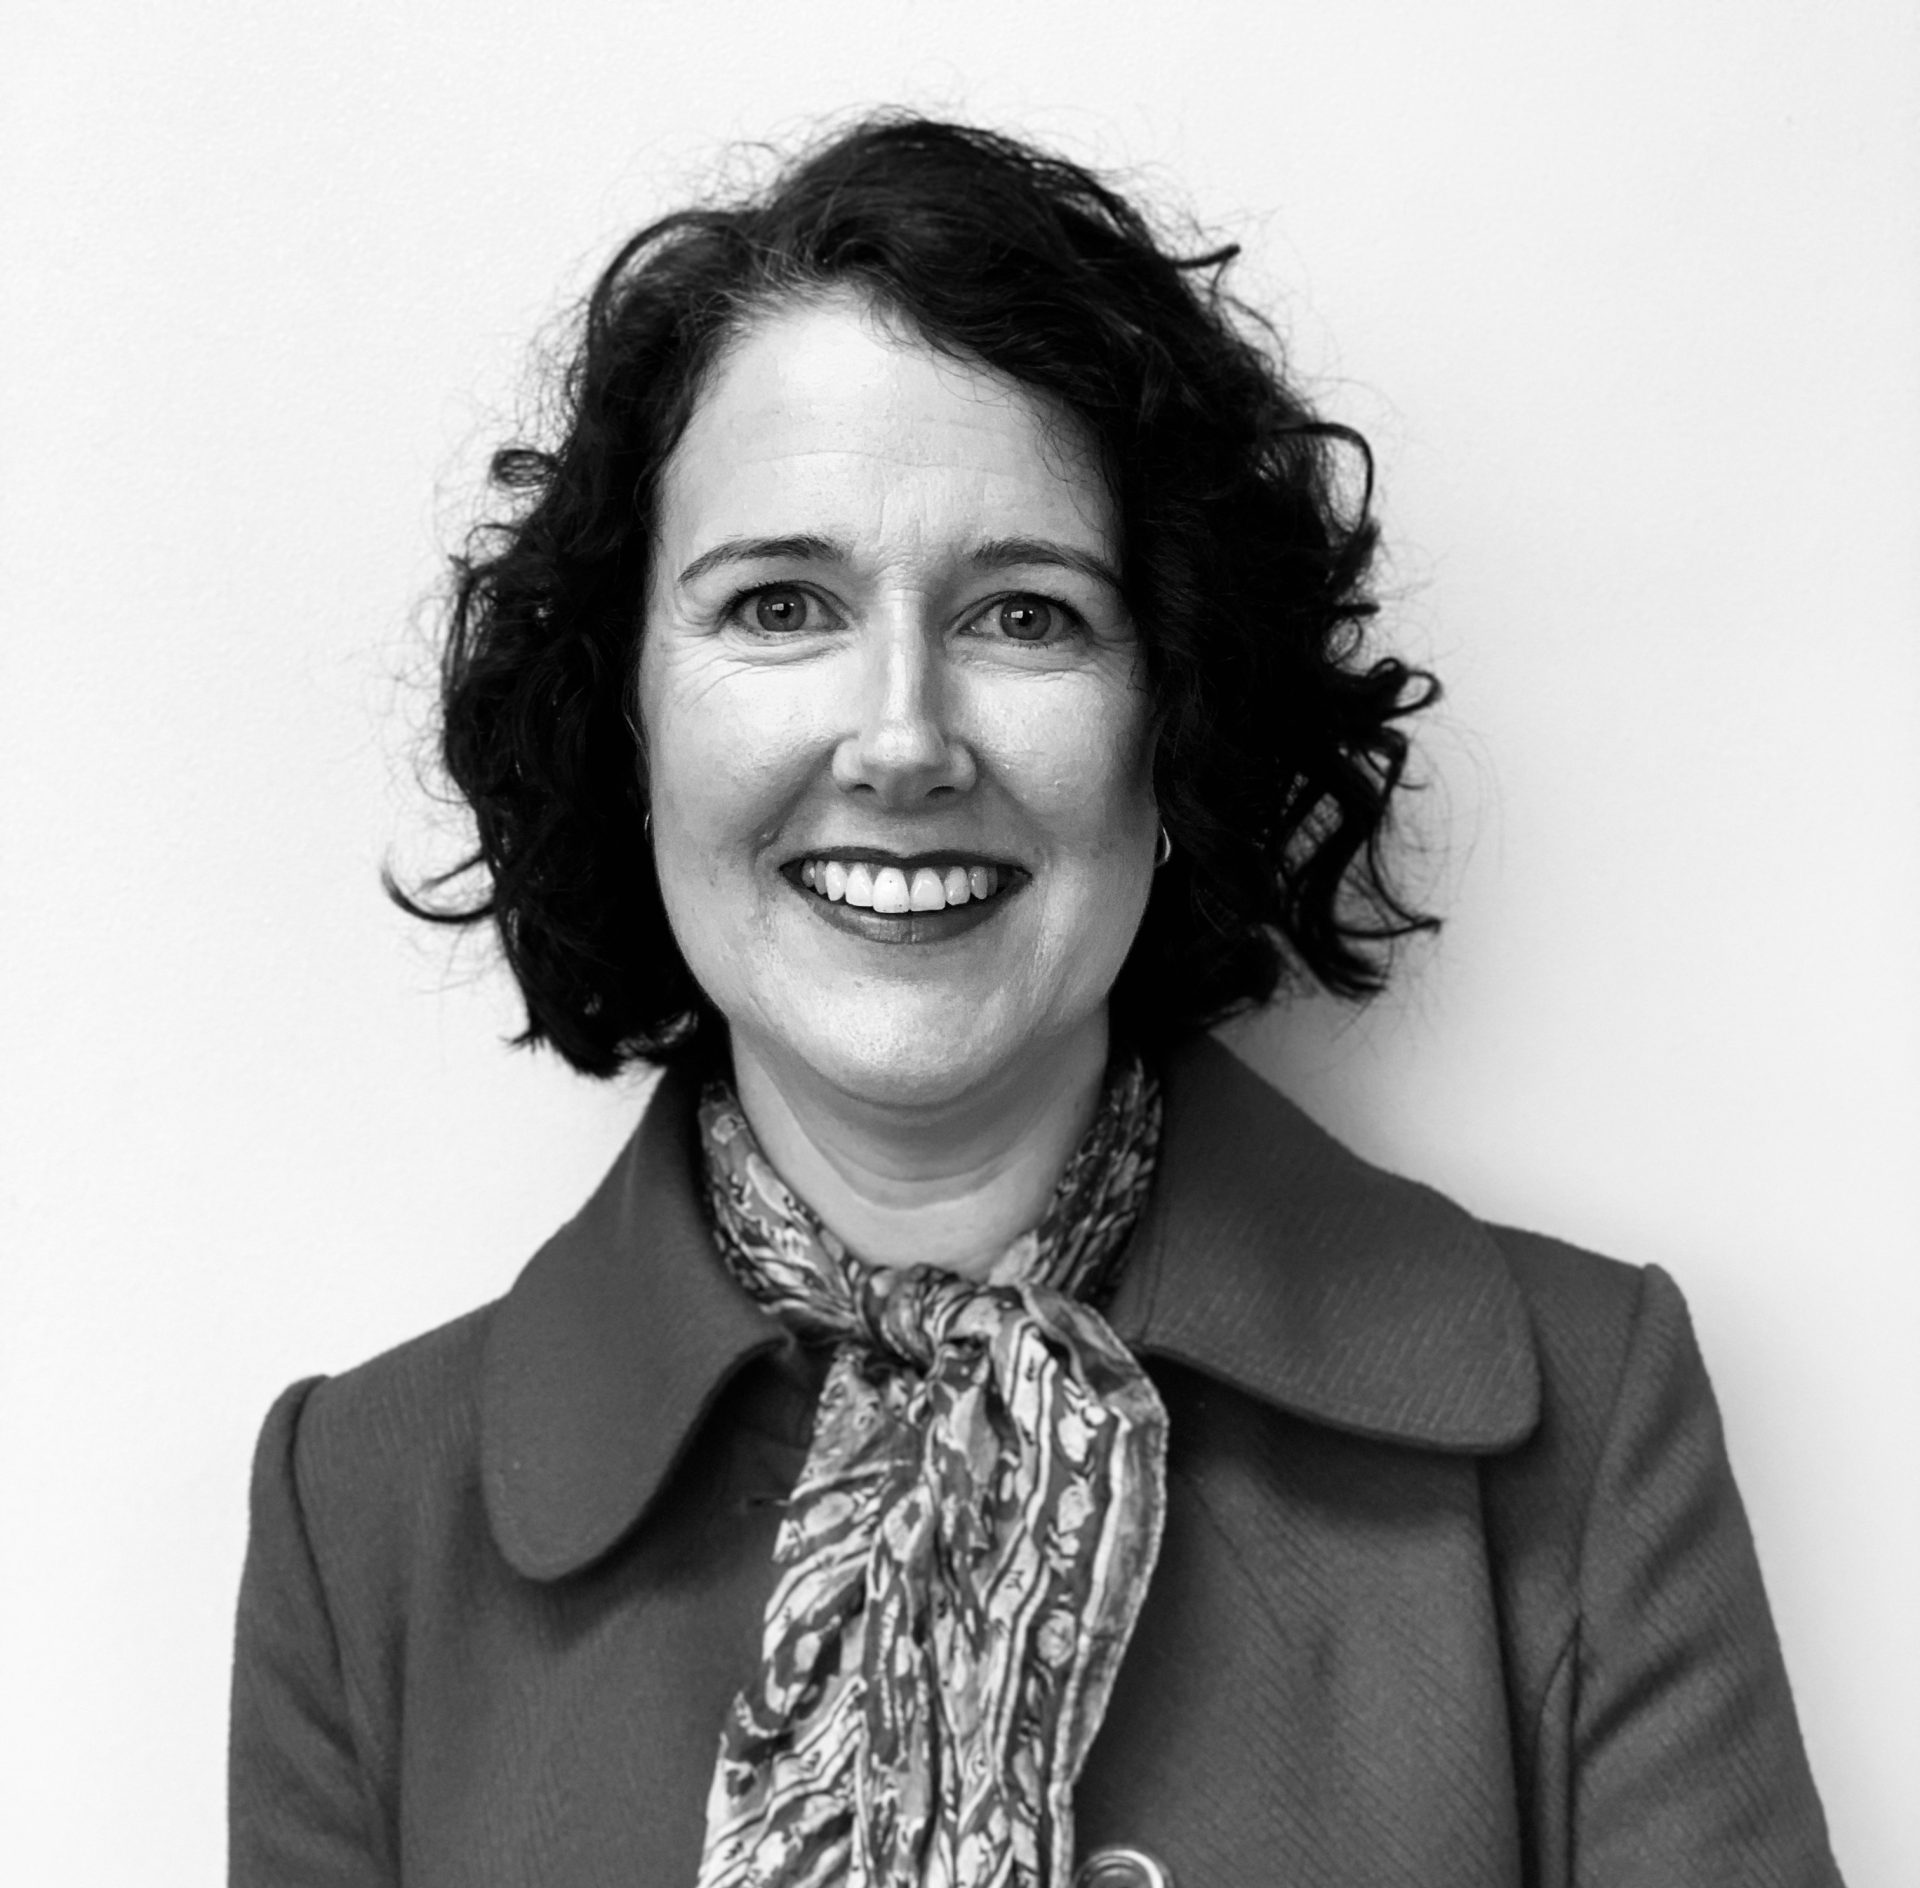 Photo of Melanie Guiney, in black and white. She is wearing a patterned scarf and a tailored coat. Her curly hair frames her face and she's smiling at the camera.